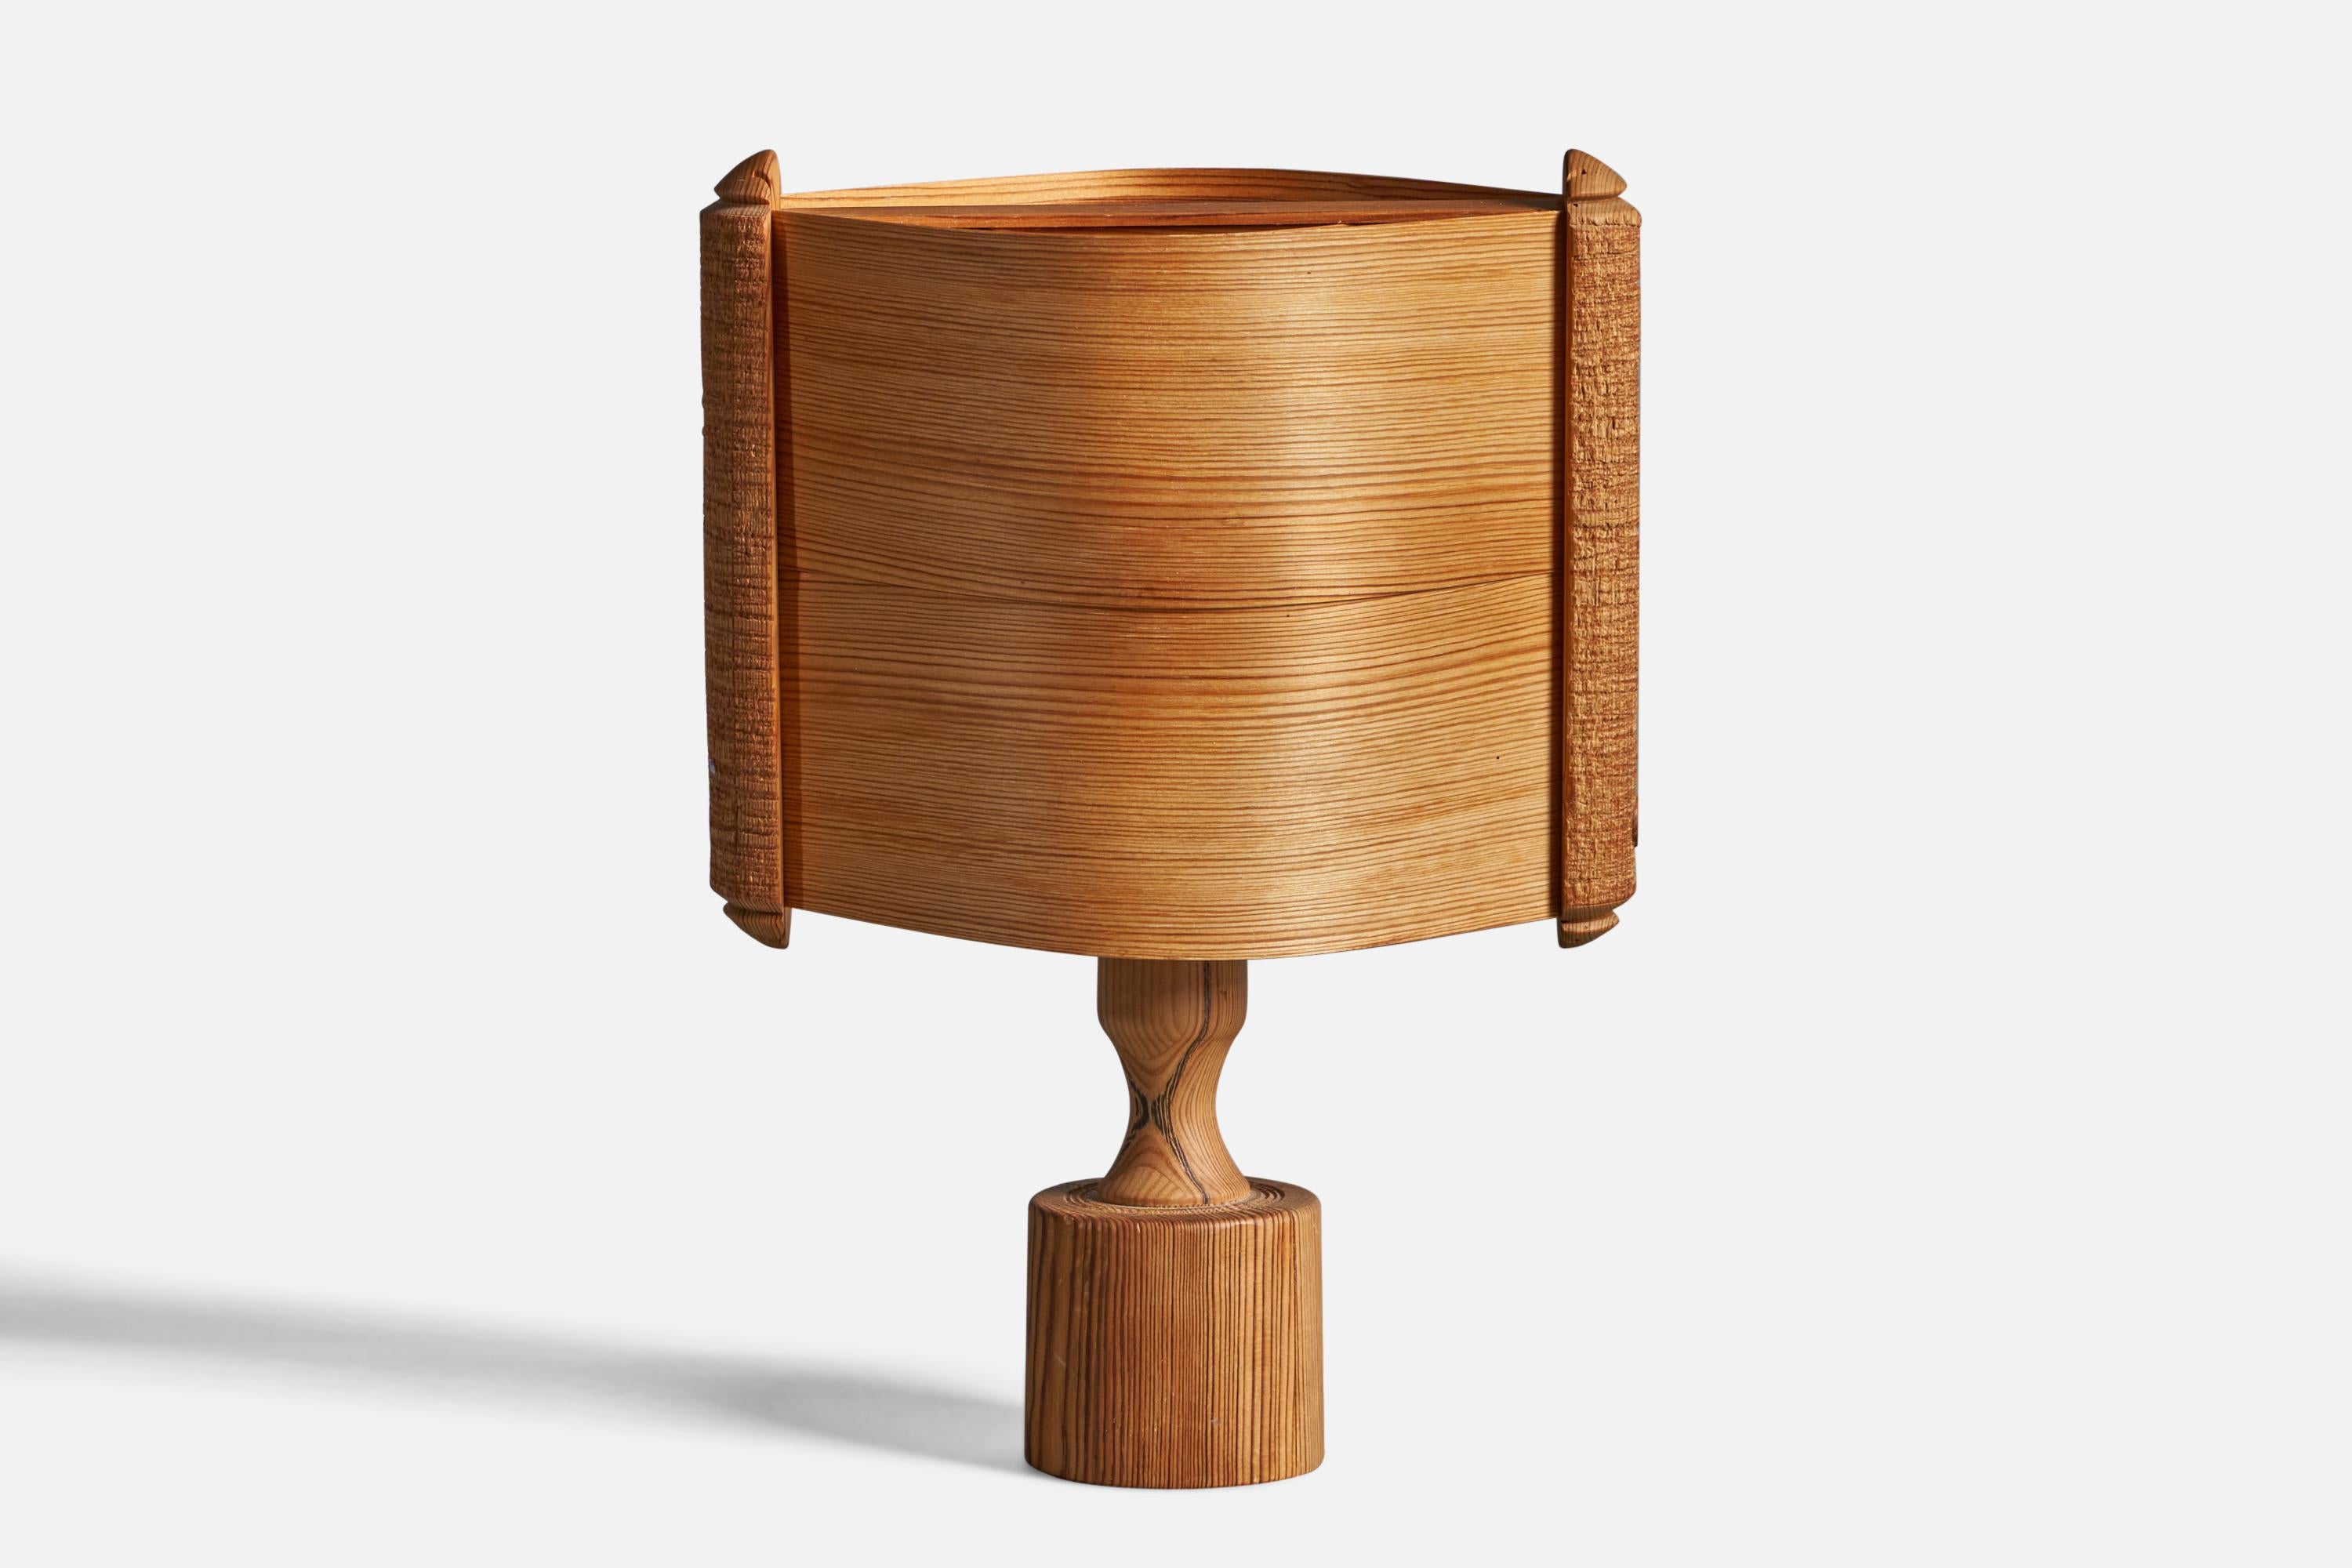 A pine and moulded pine-veneer table lamp designed and produced in Sweden, 1970s.

Overall Dimensions (inches): 14.25